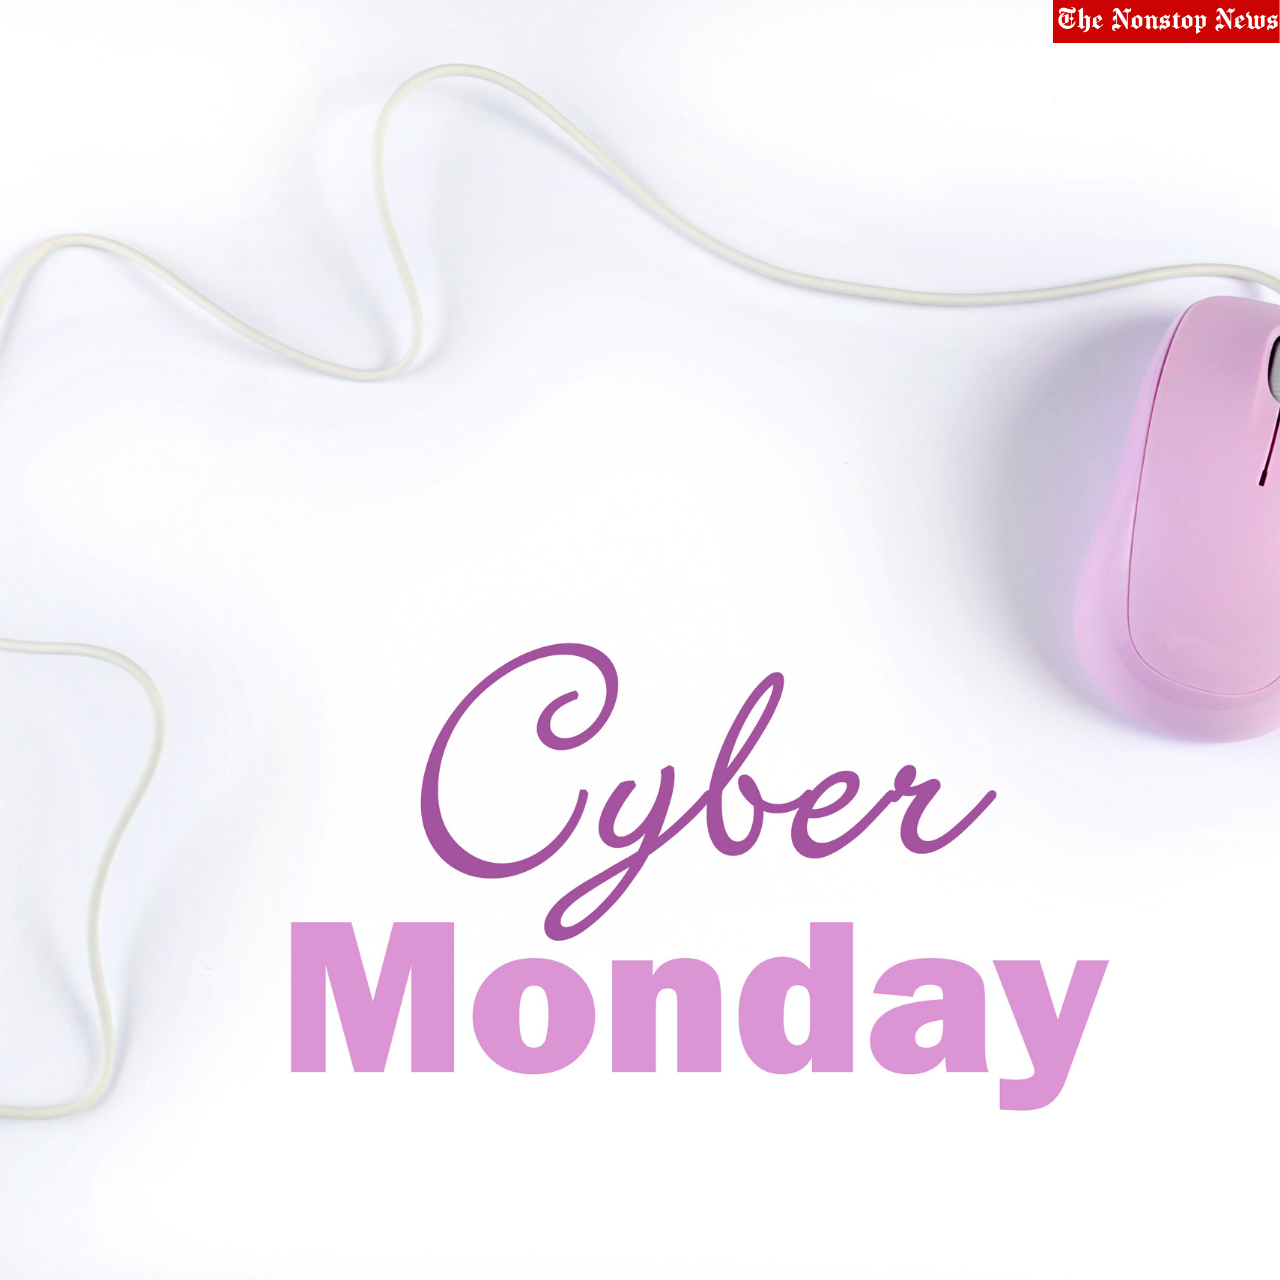 Cyber Monday 2021 Wishes, Quotes, Slogans, Greetings, Sayings, Messages, and Images to Share